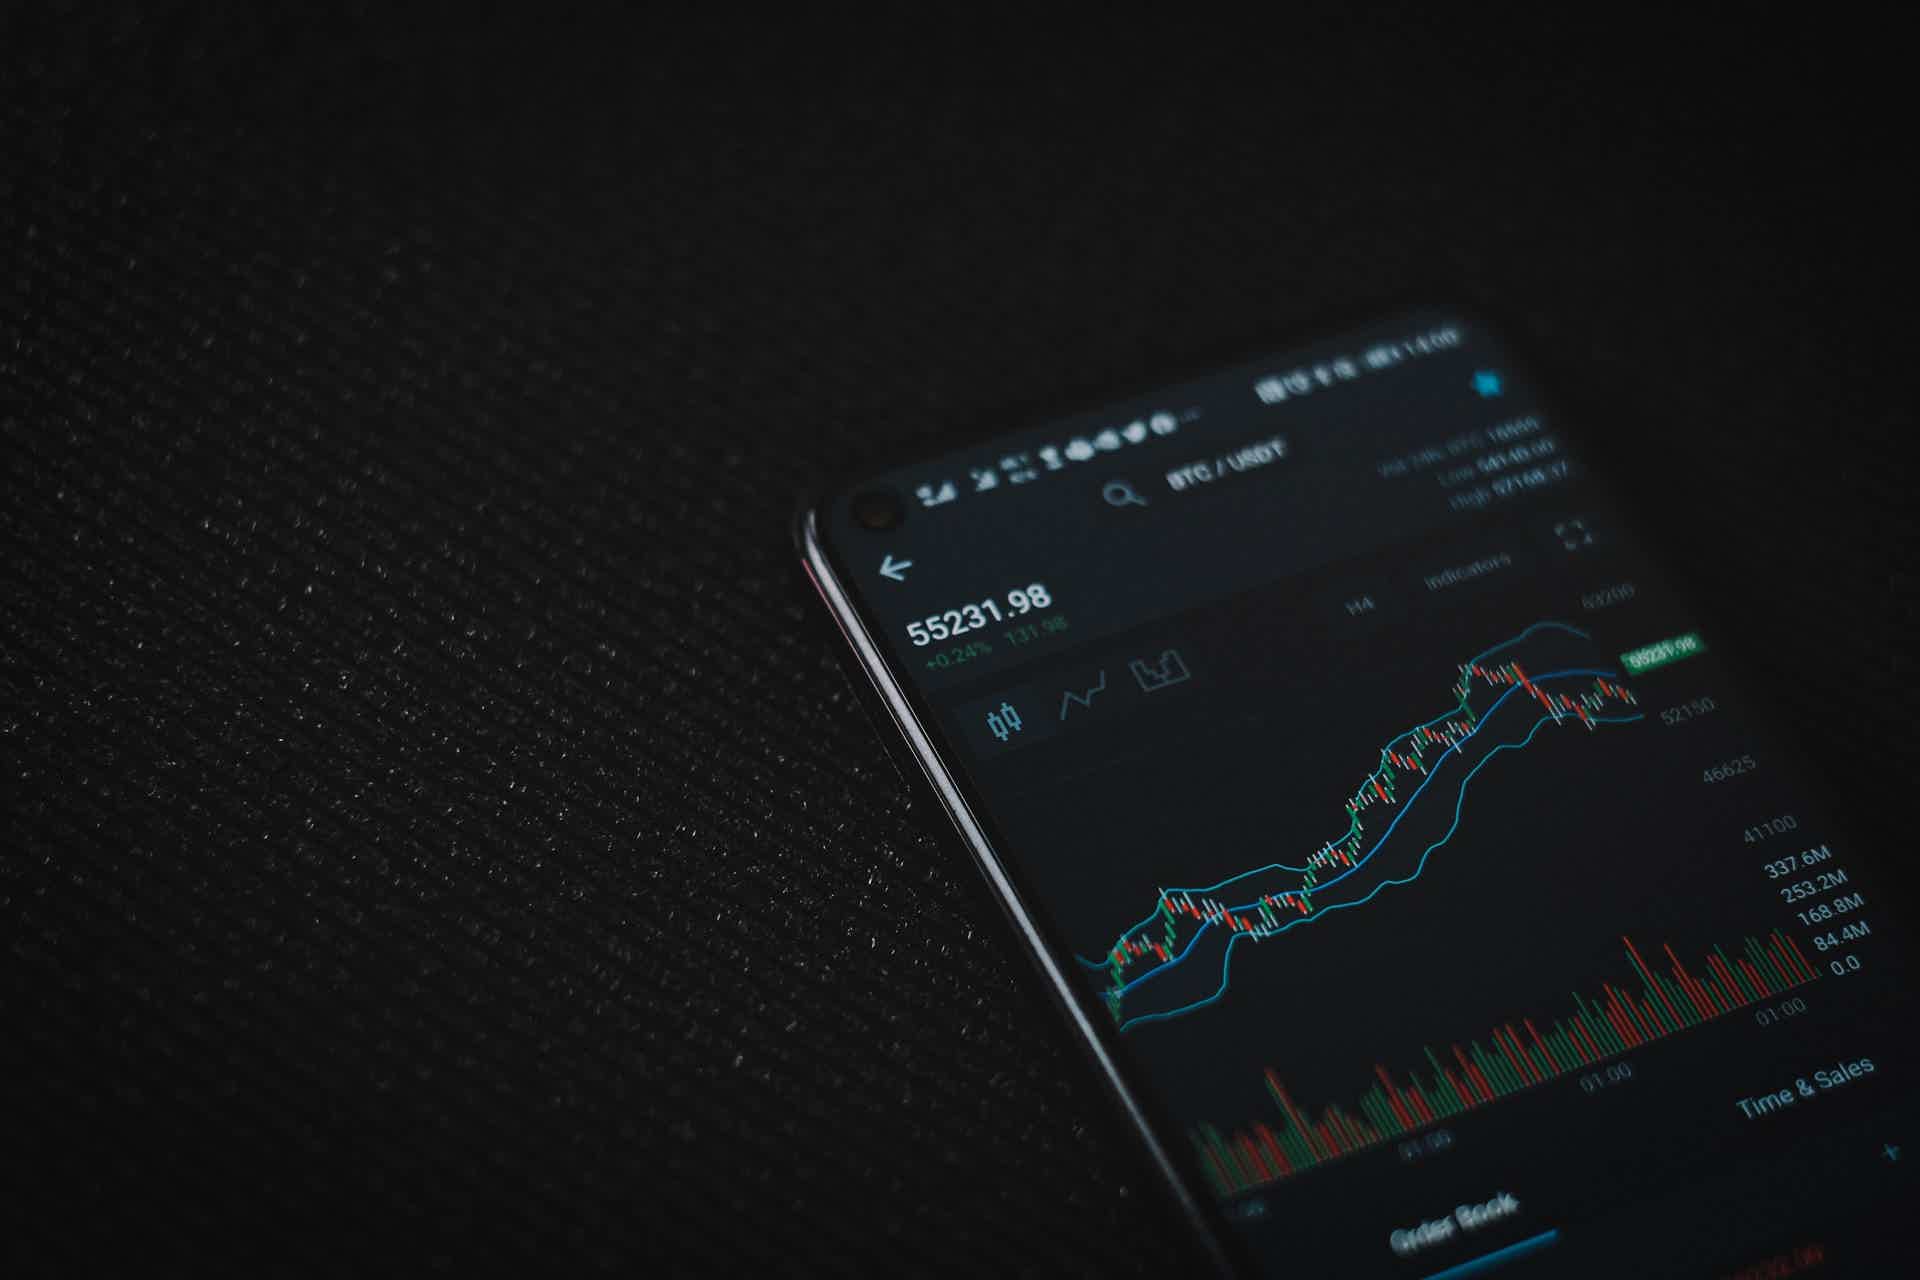 Learn all about how this crypto wallet works! Source: Unsplash